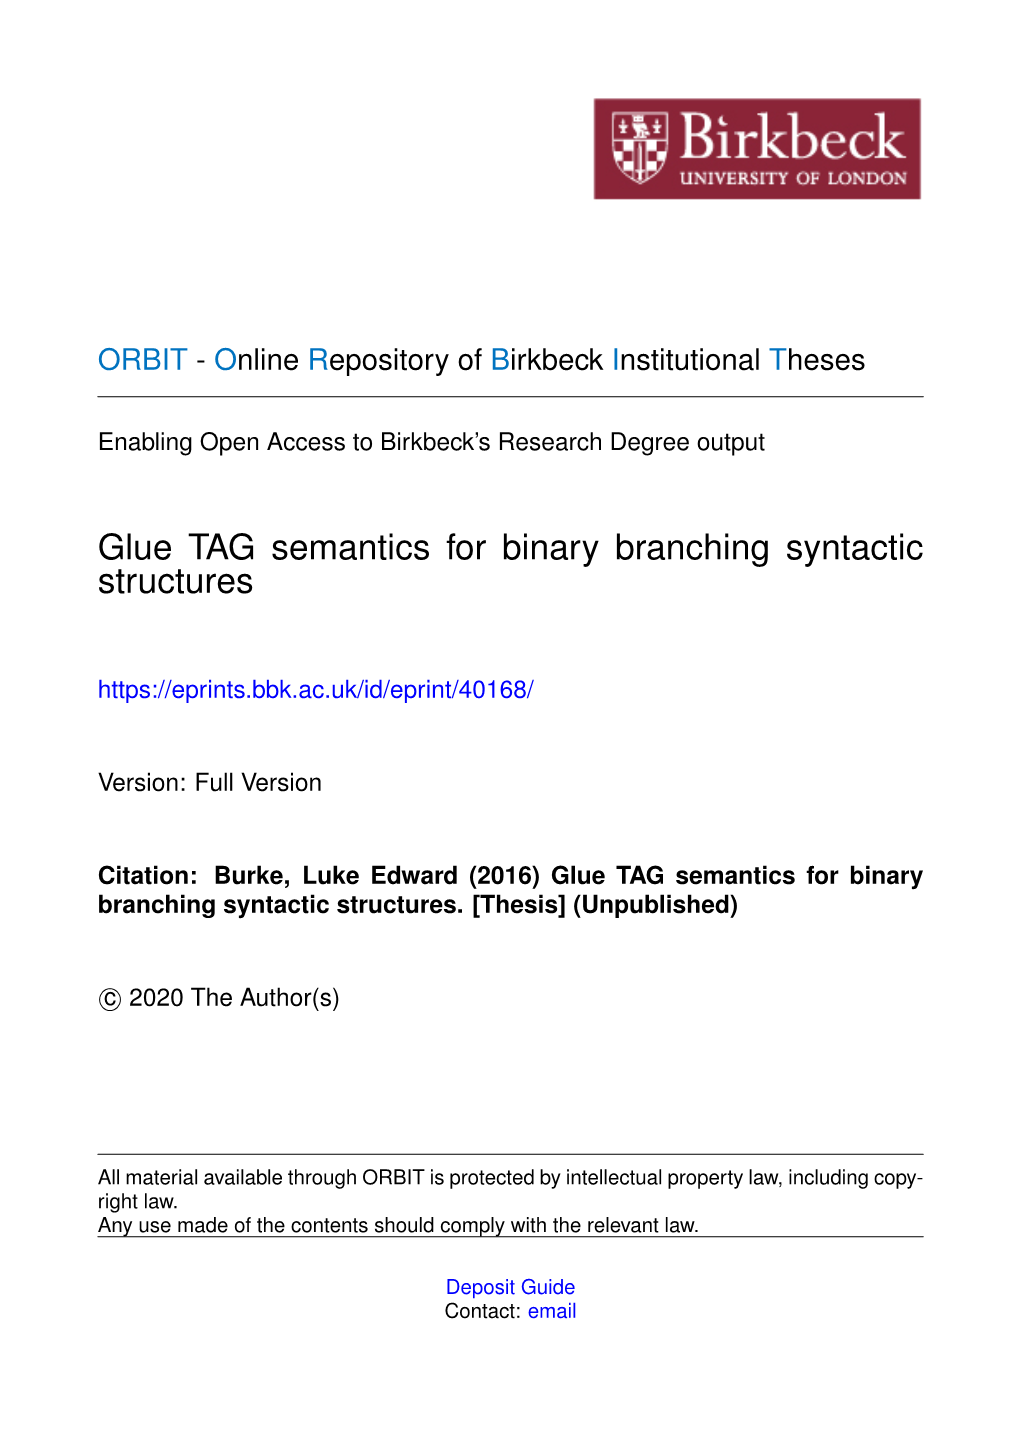 Glue TAG Semantics for Binary Branching Syntactic Structures